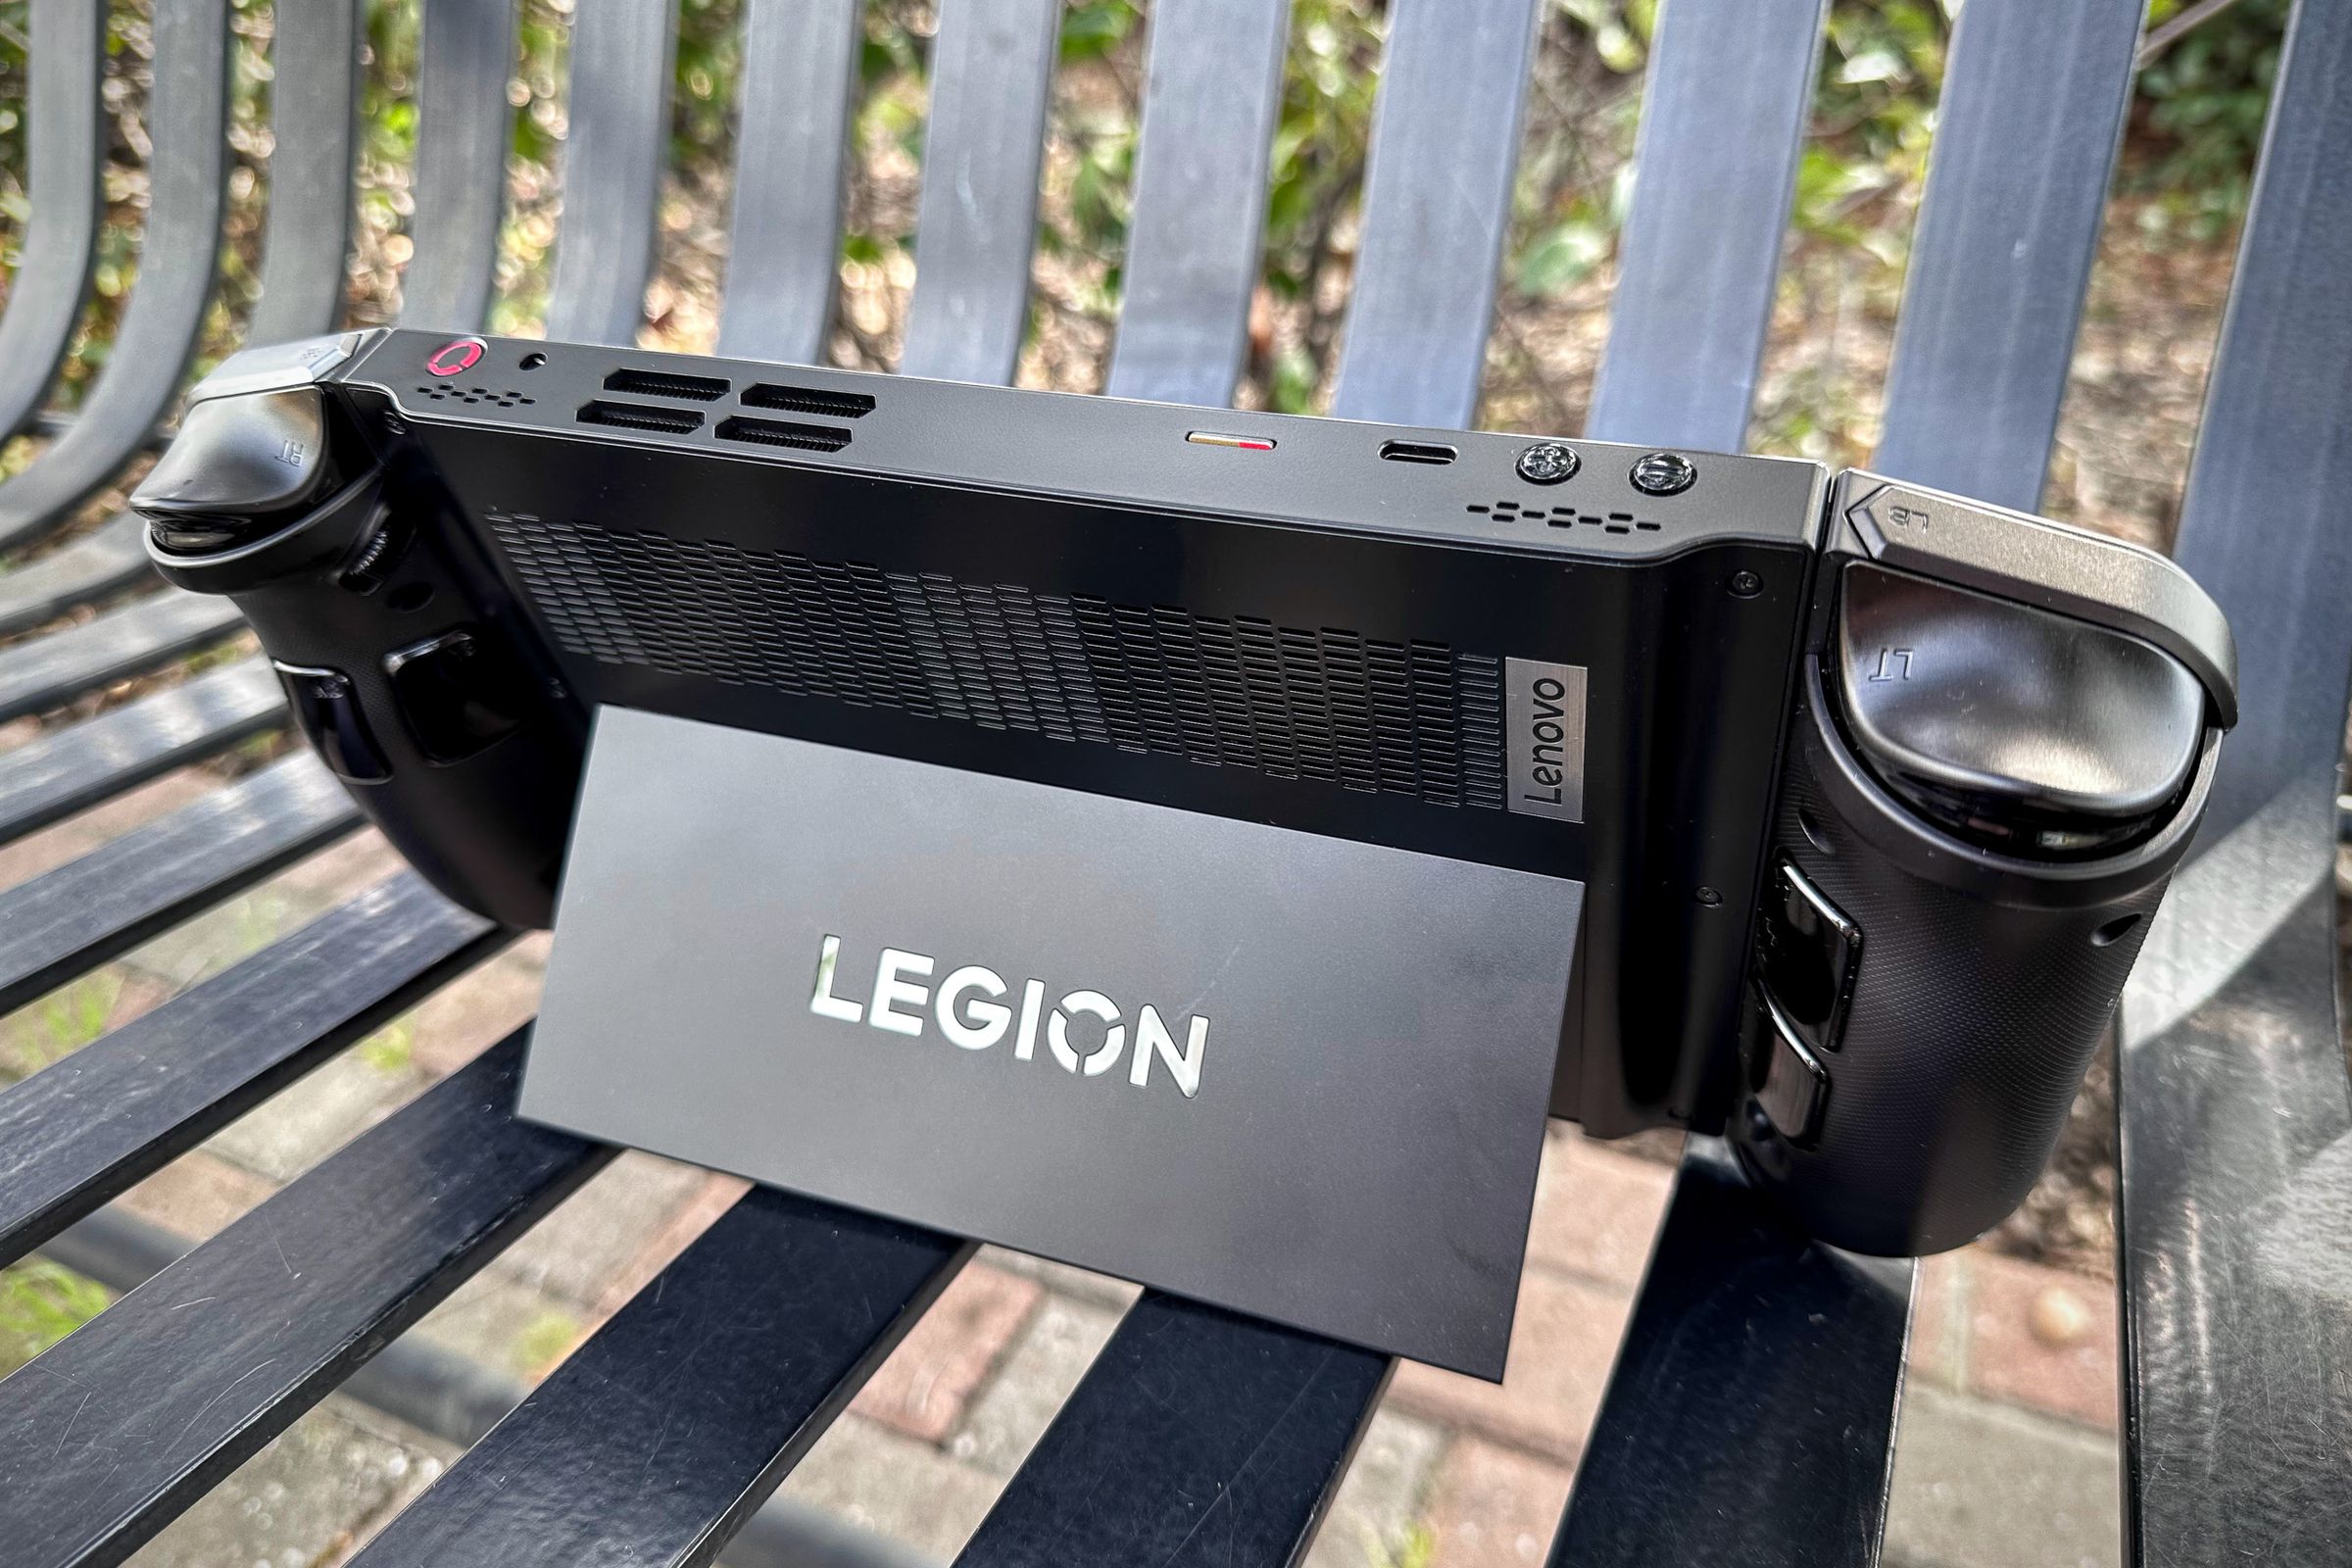 The Lenovo Legion Go, with its controllers attached and its kickstand unfolded.